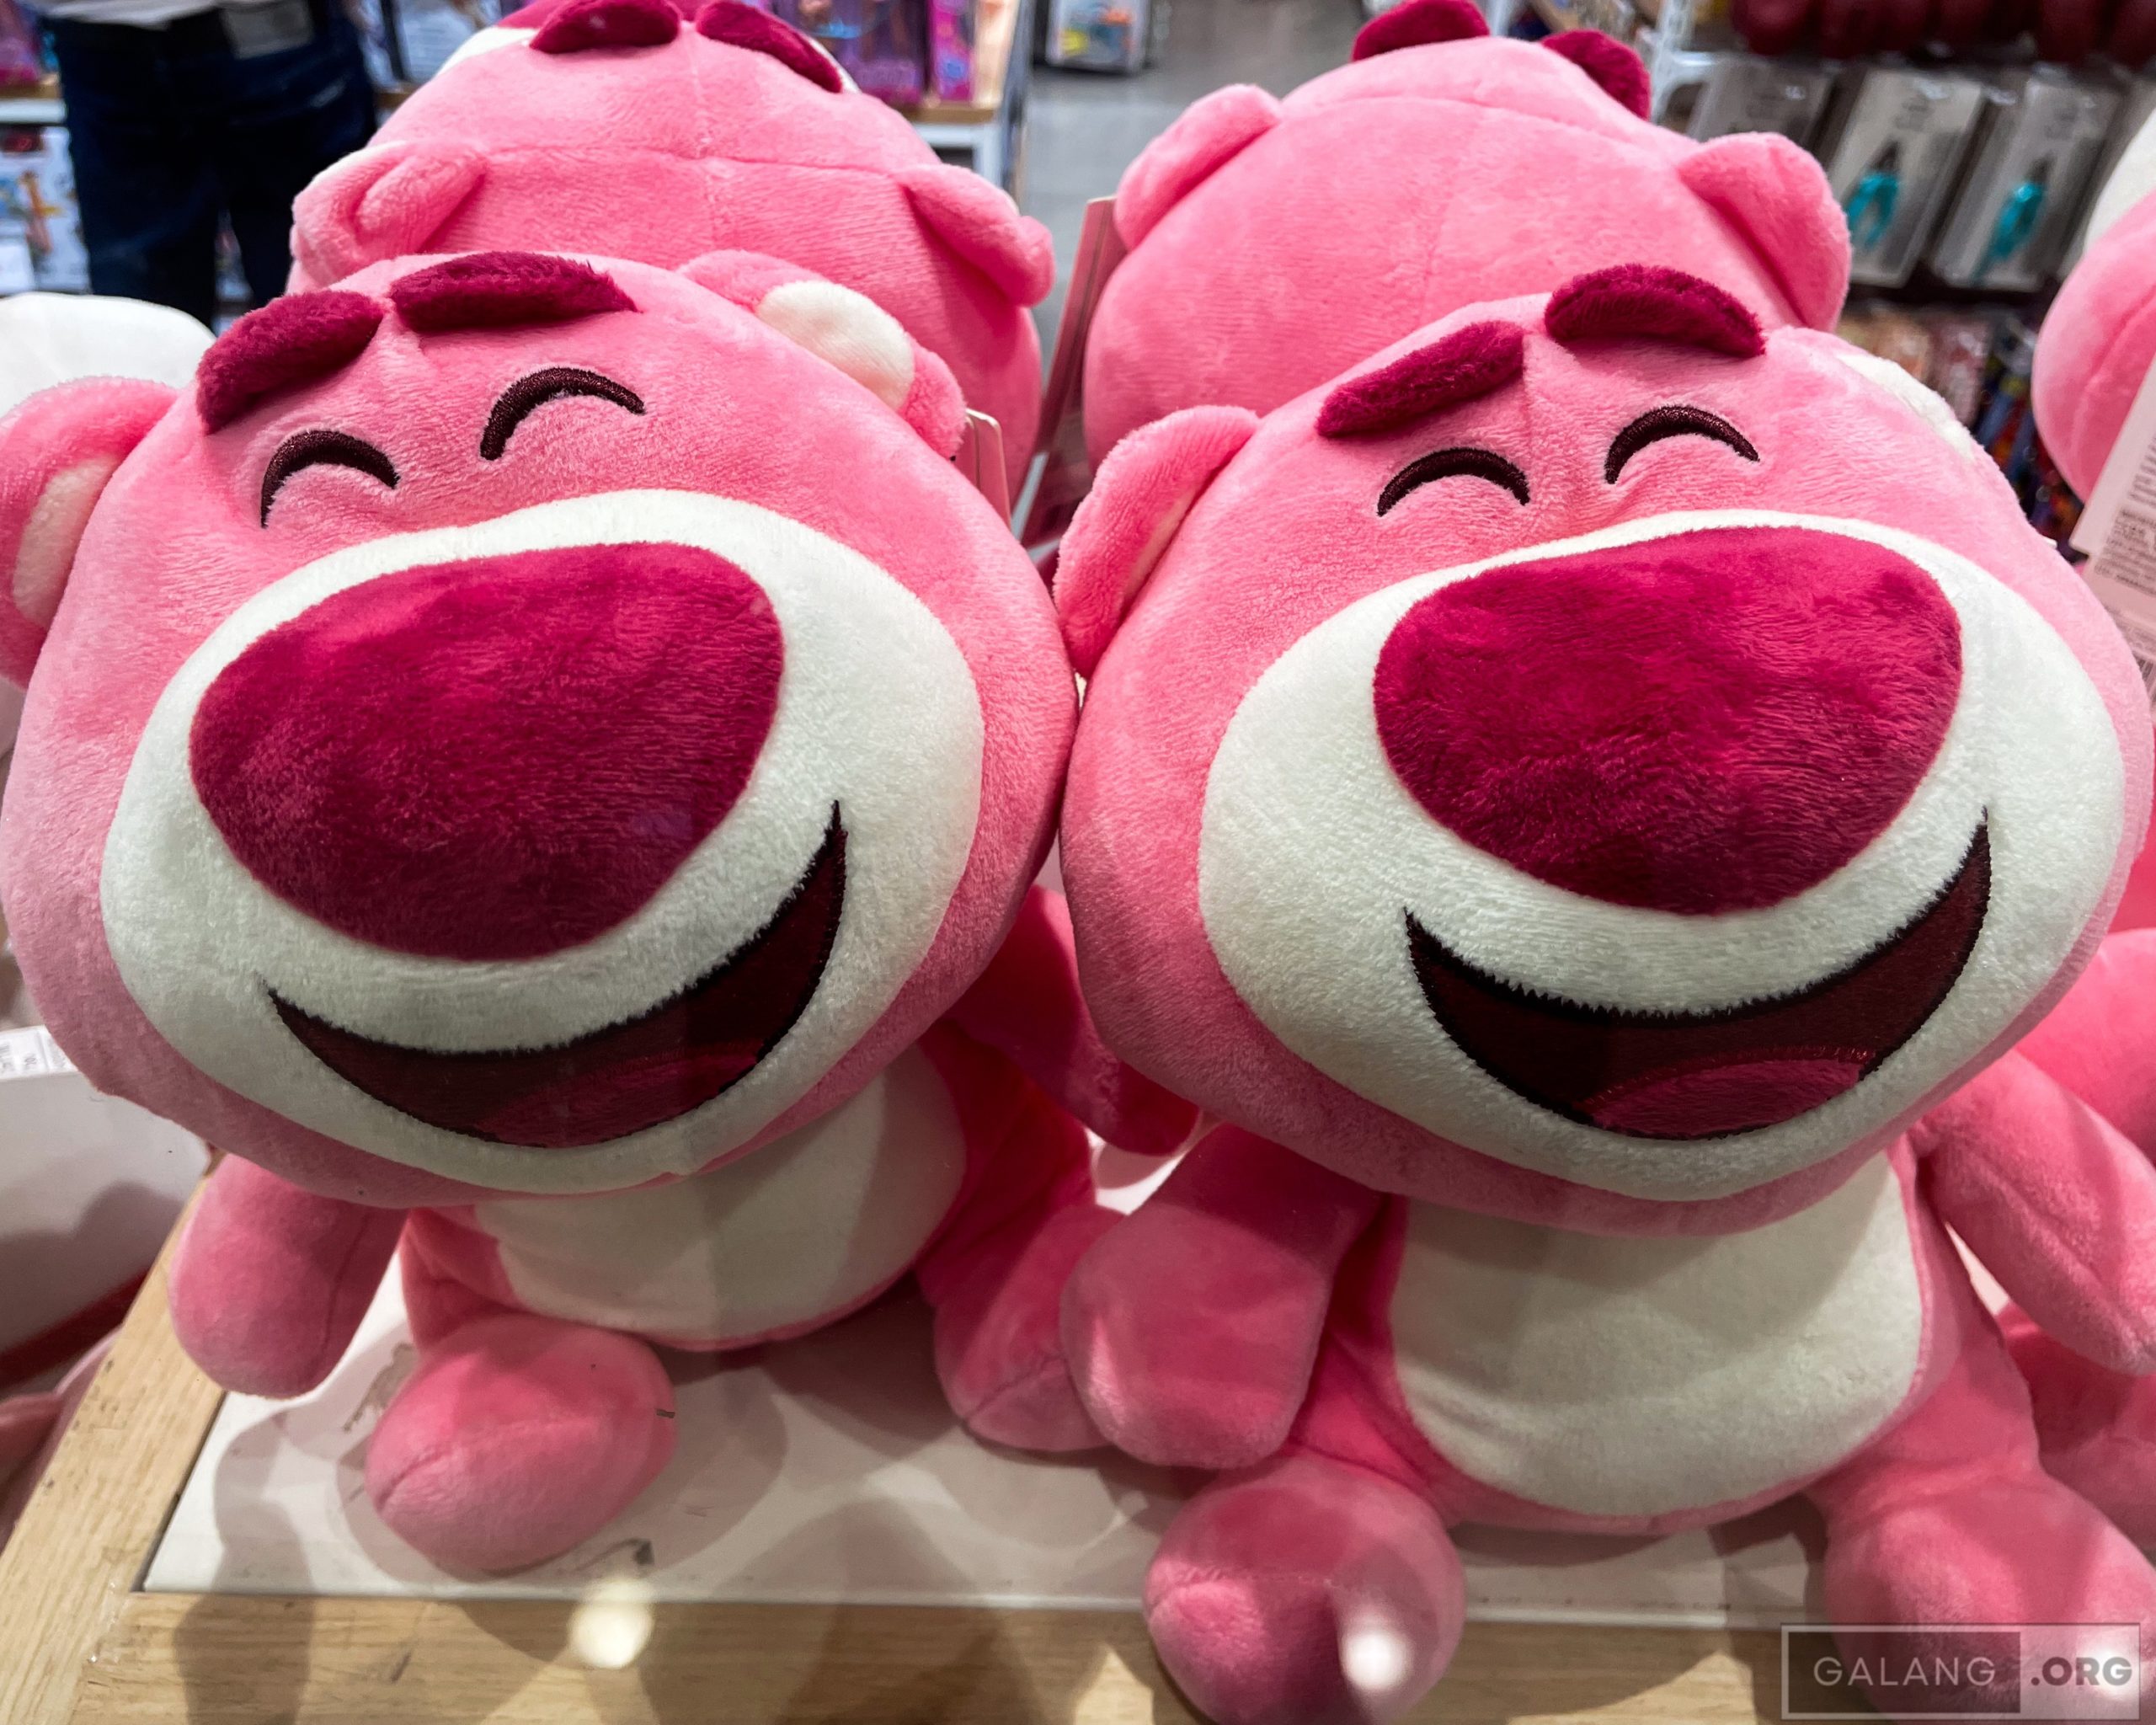 Smiling stuffed toys